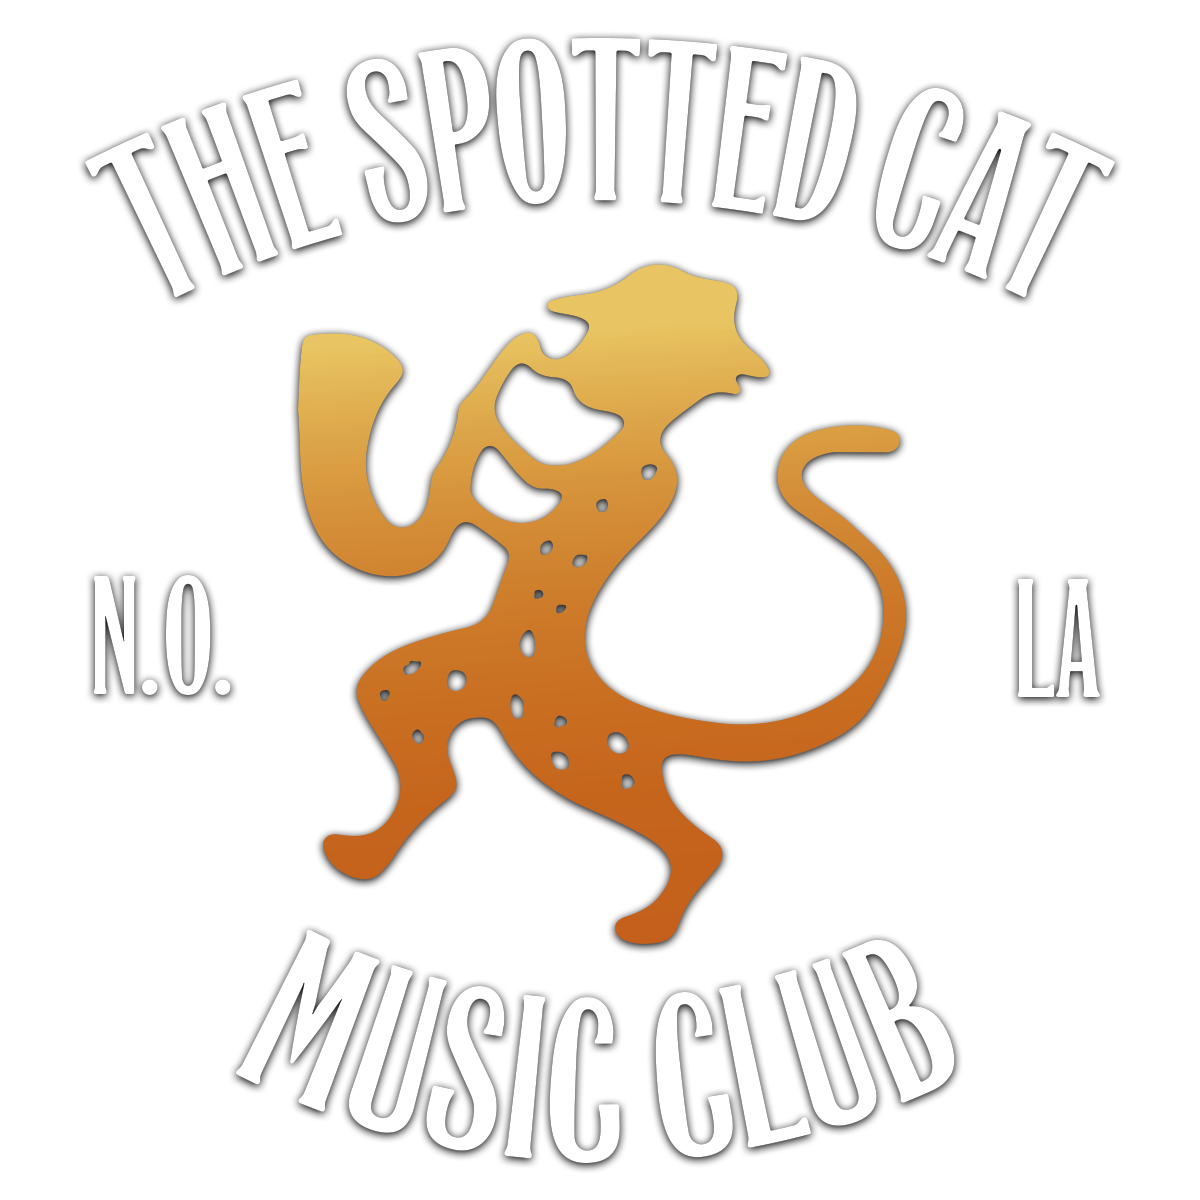 Spotted Cat Music Club